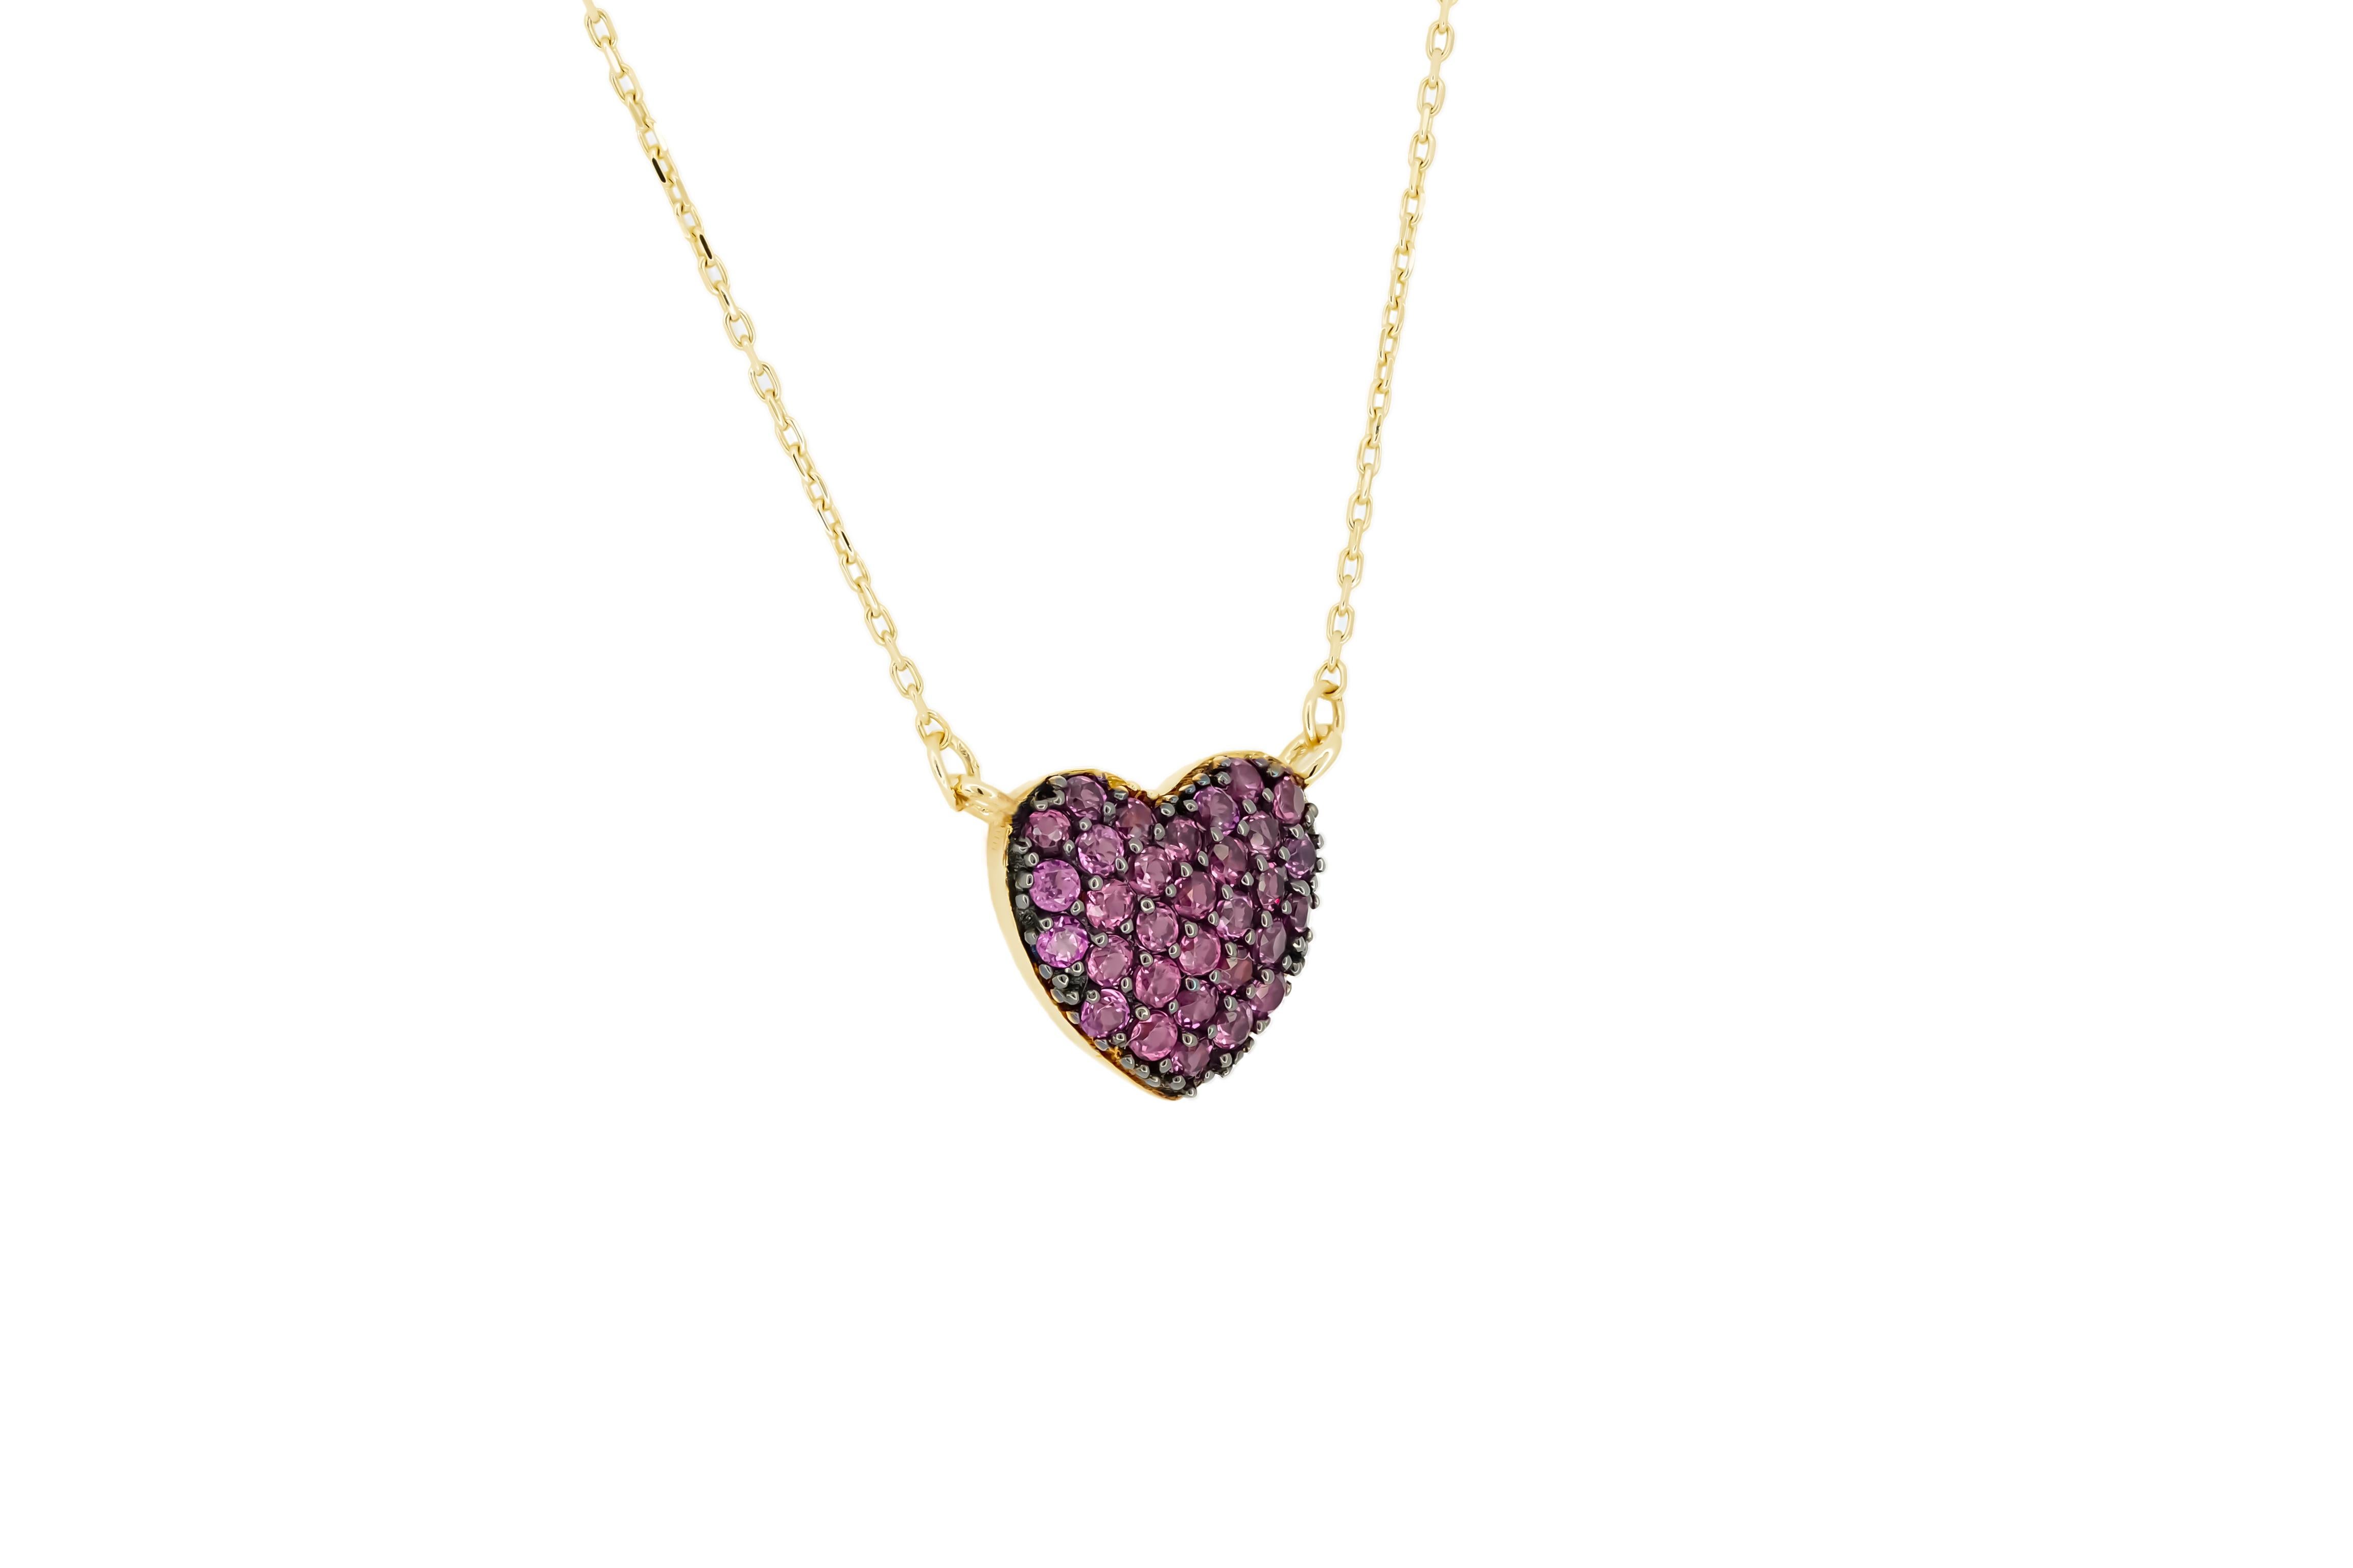 Heart shaped 14k gold pendant necklace. 
Heart pendant with pink, red garnet. Red heart pendant. Valentine day gift for her. Garnet pendant. Red heart solitaire pendant. 14k Solid Gold heart Pendant necklace. Heart necklace for women. Dainty charm